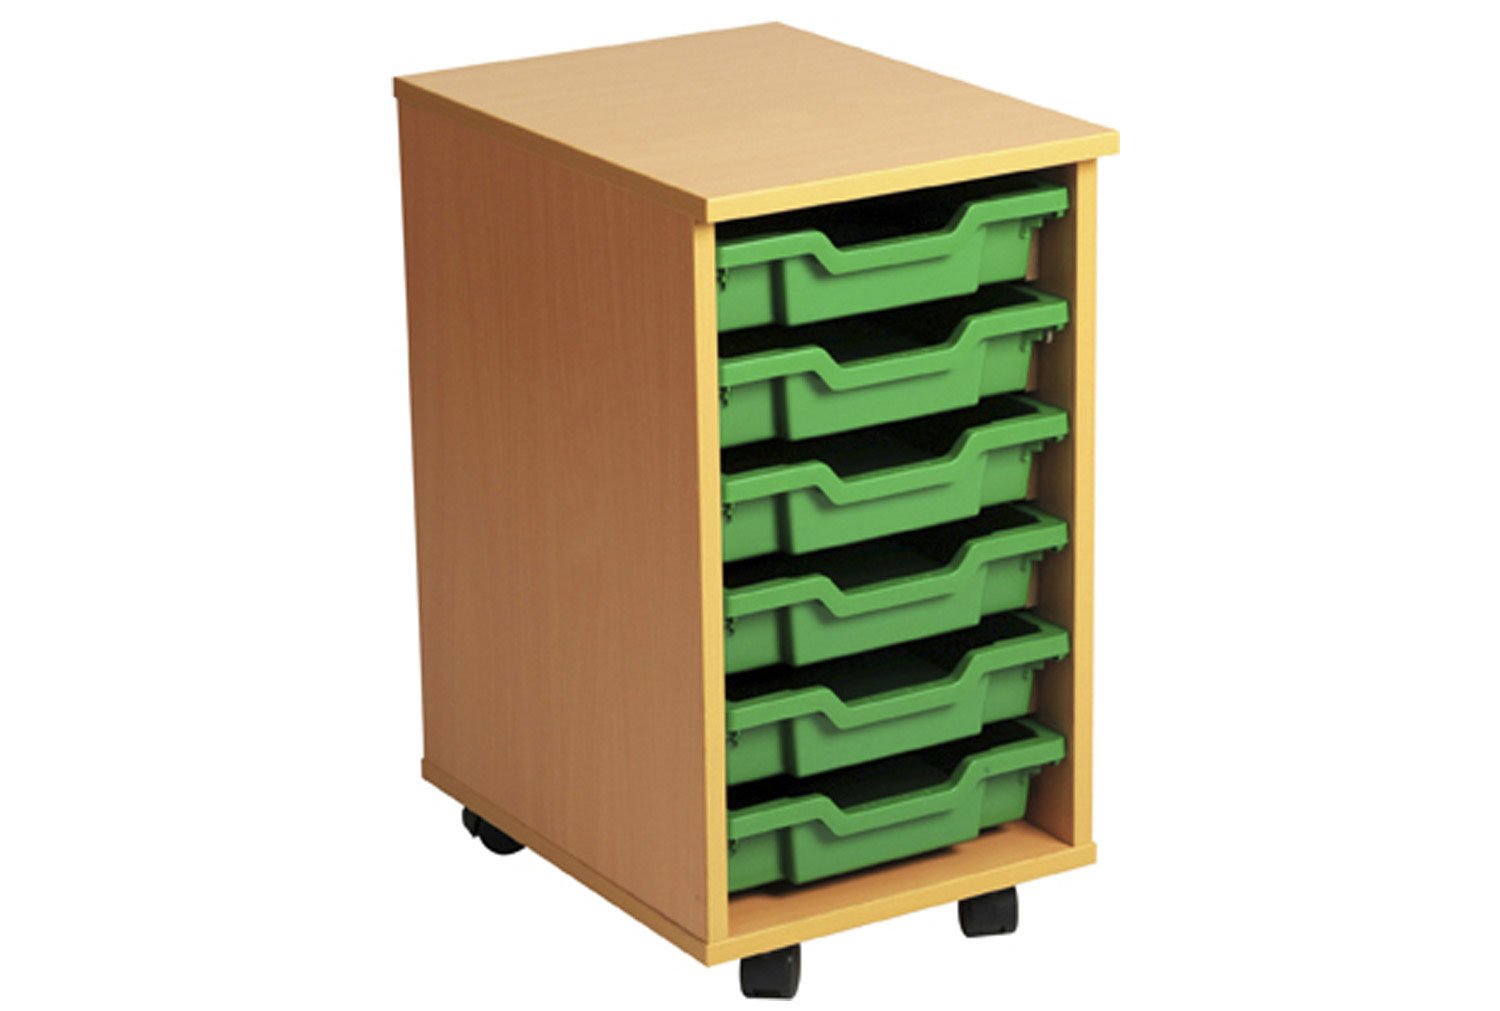 Primary Single Column Mobile Classroom Tray Storage Unit With 7 Shallow Classroom Trays, Beech/ Green Classroom Trays